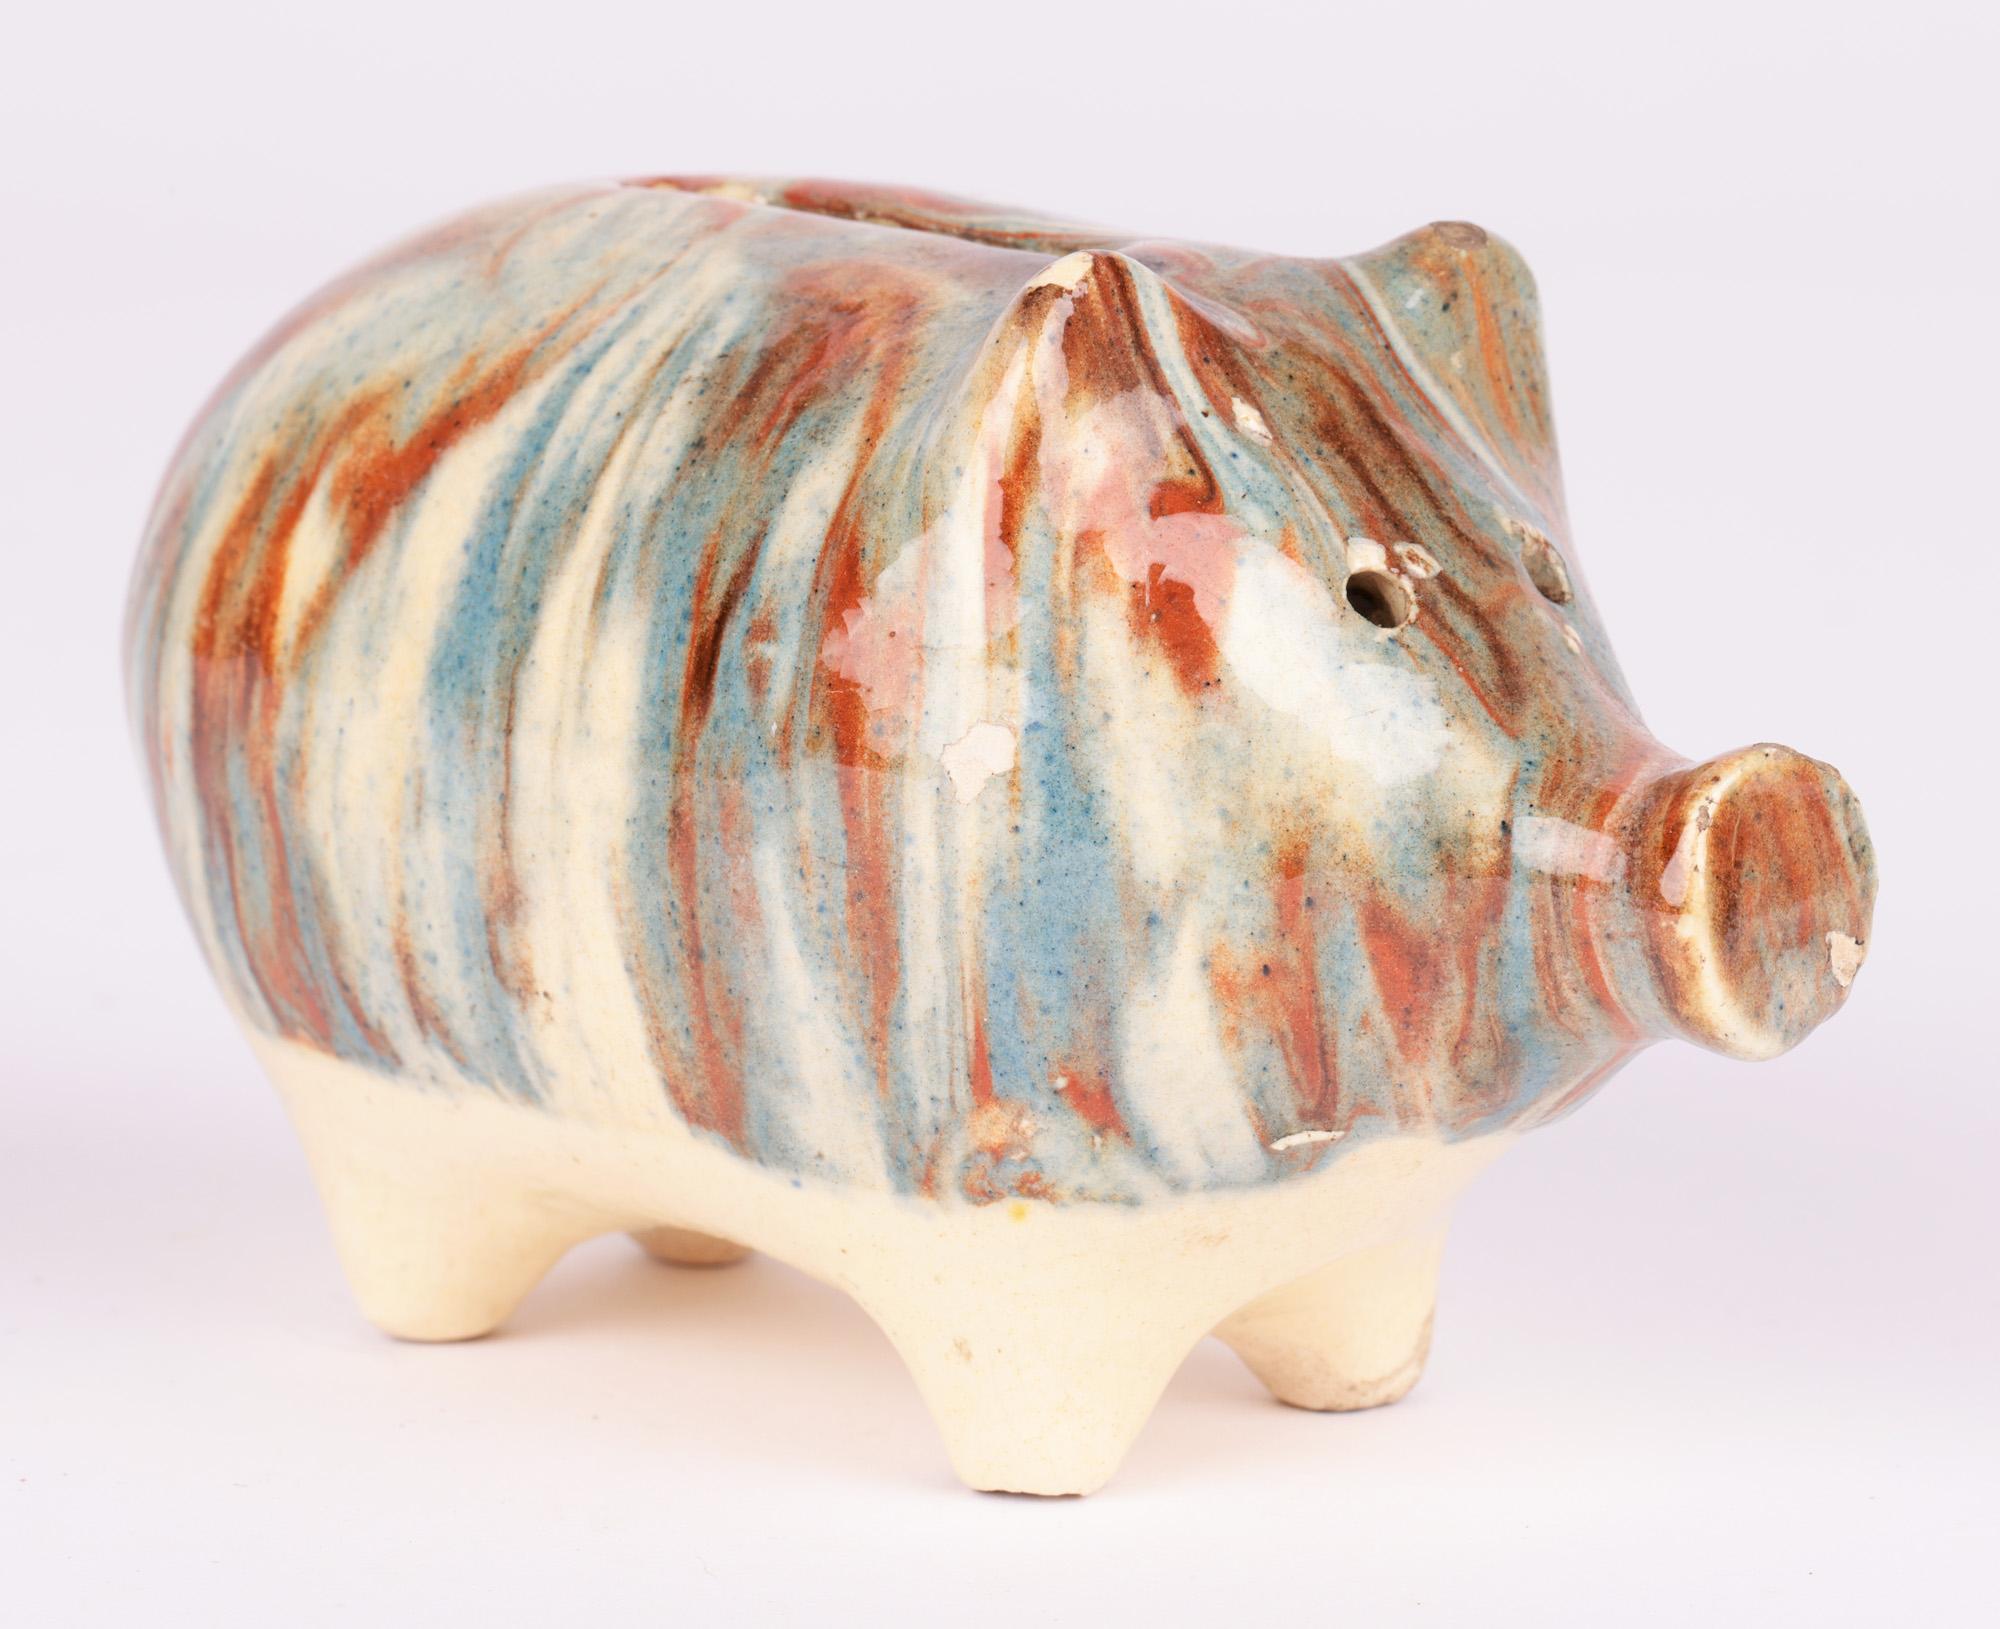 Staffordshire Marble Slipware Glazed Pottery Pig Moneybox For Sale 5